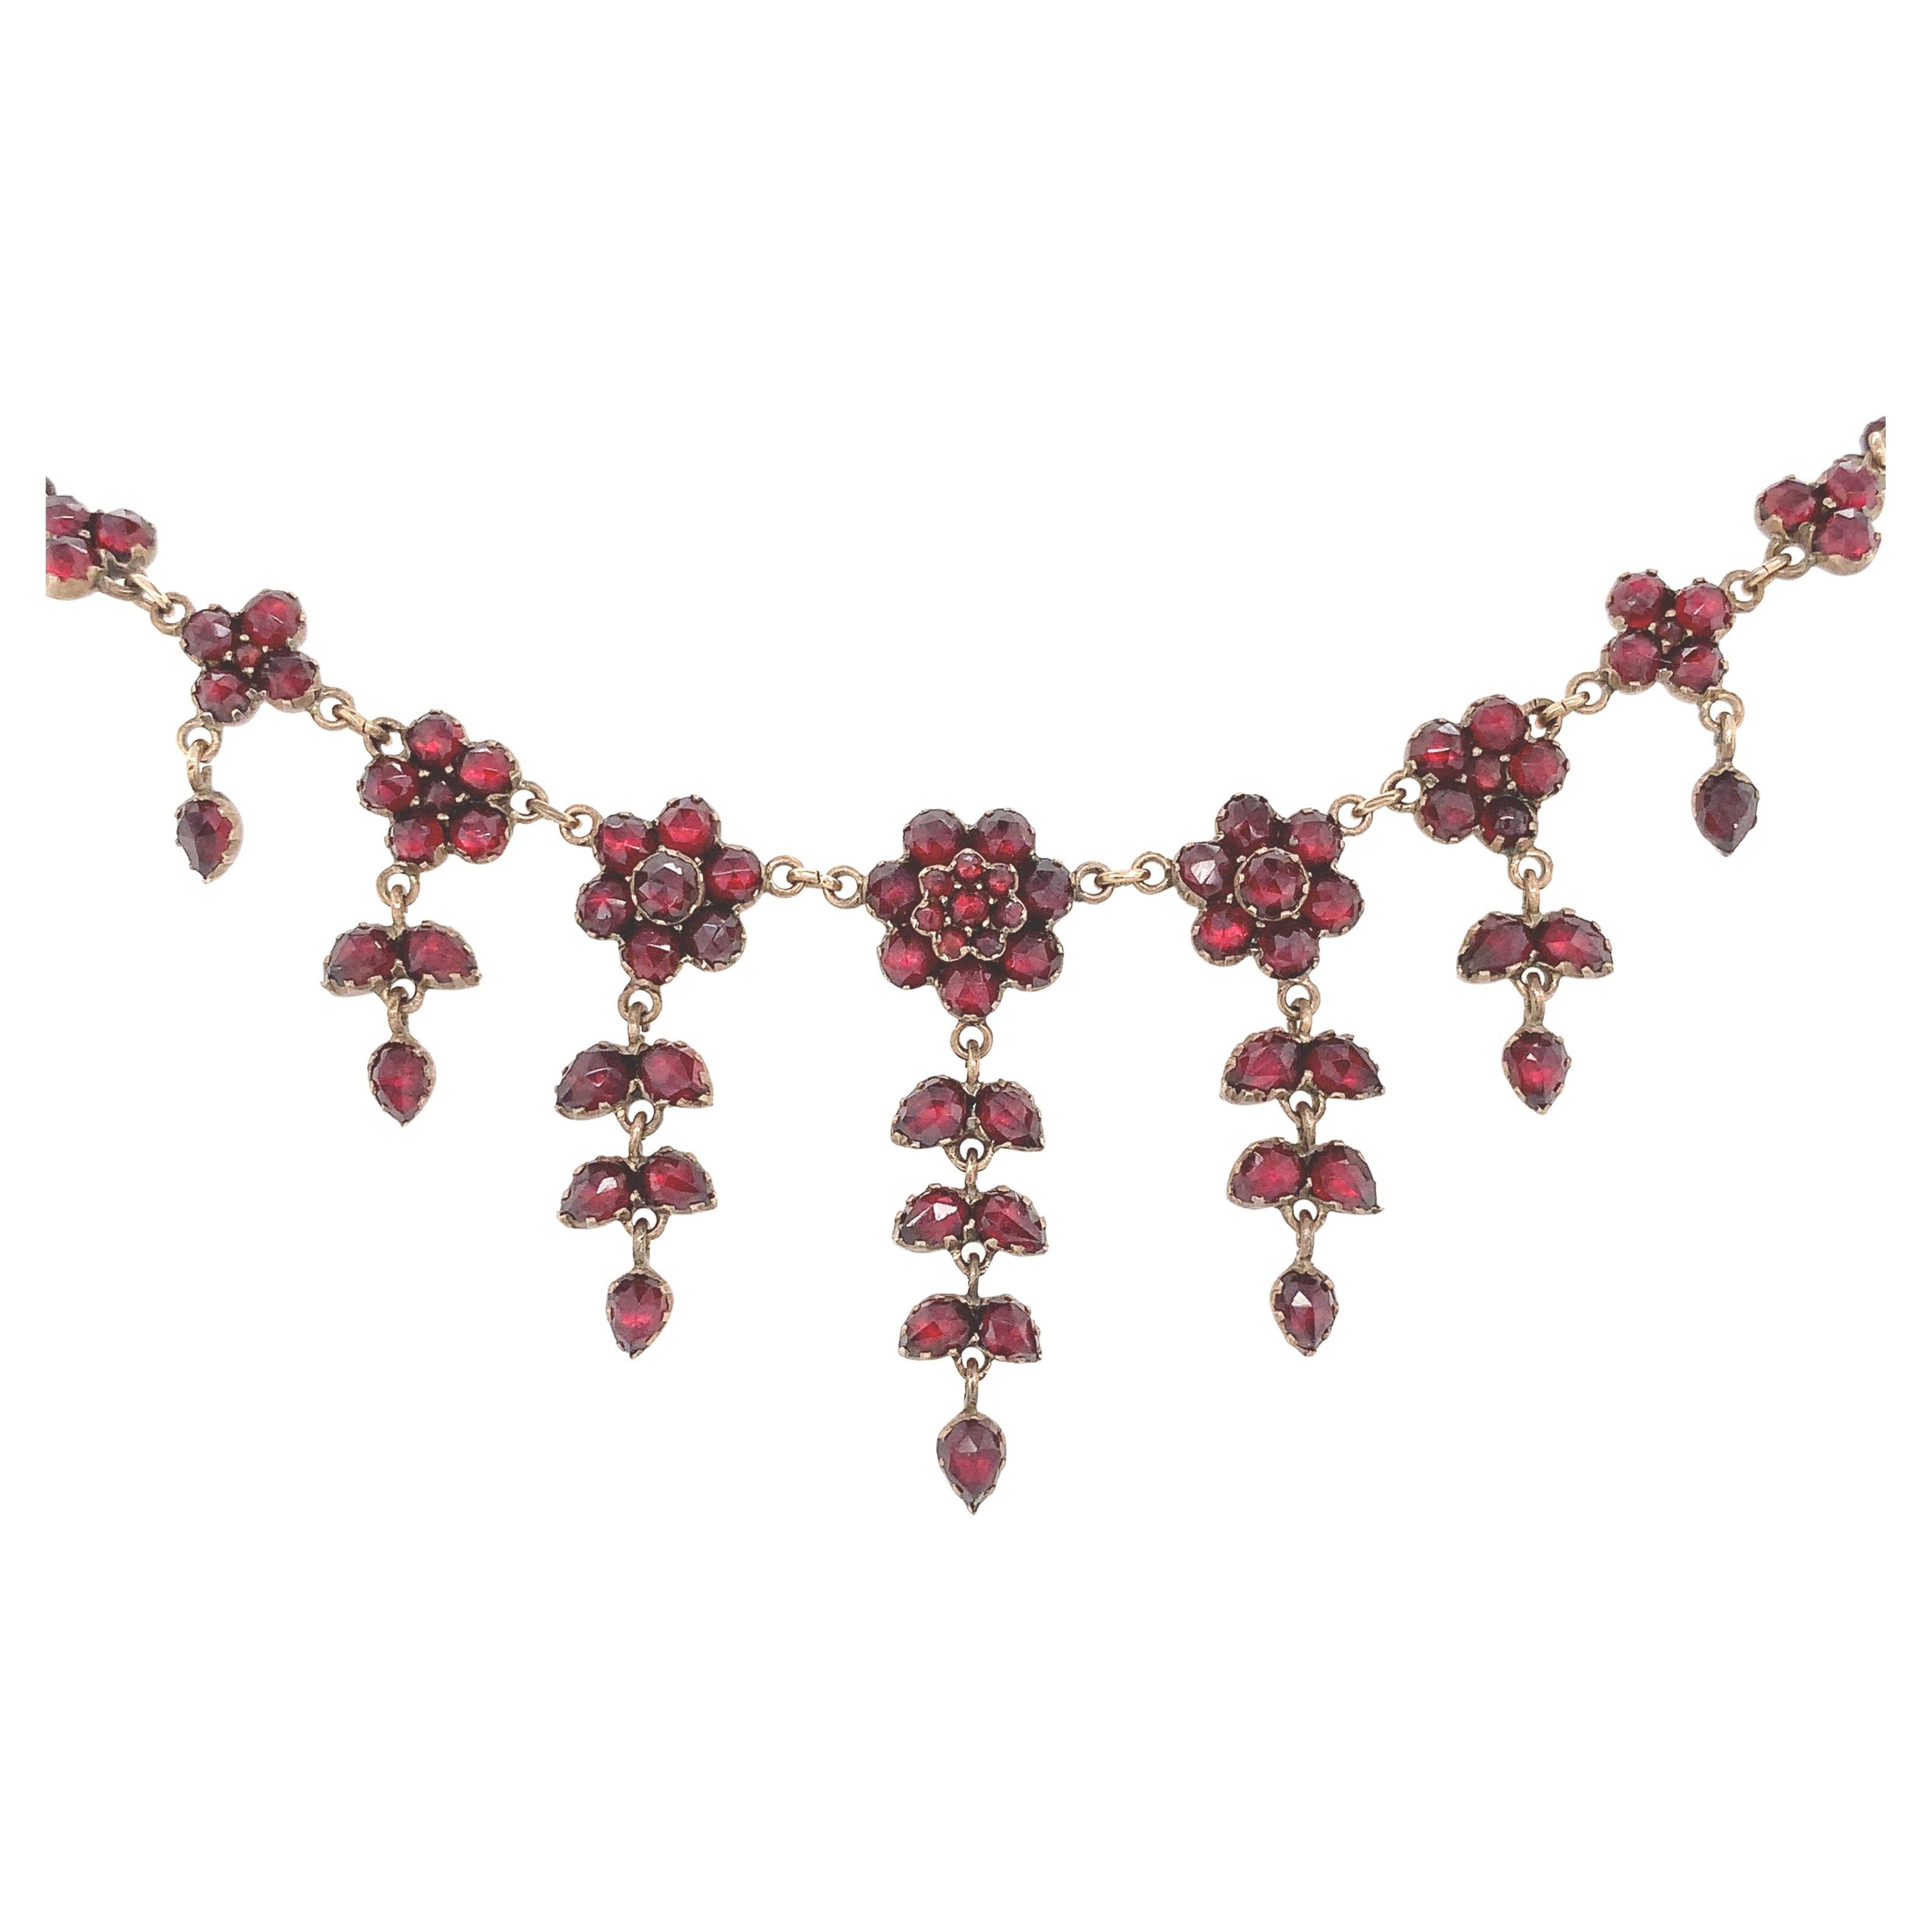 Bohemian Garnet Necklace with 7 drops 